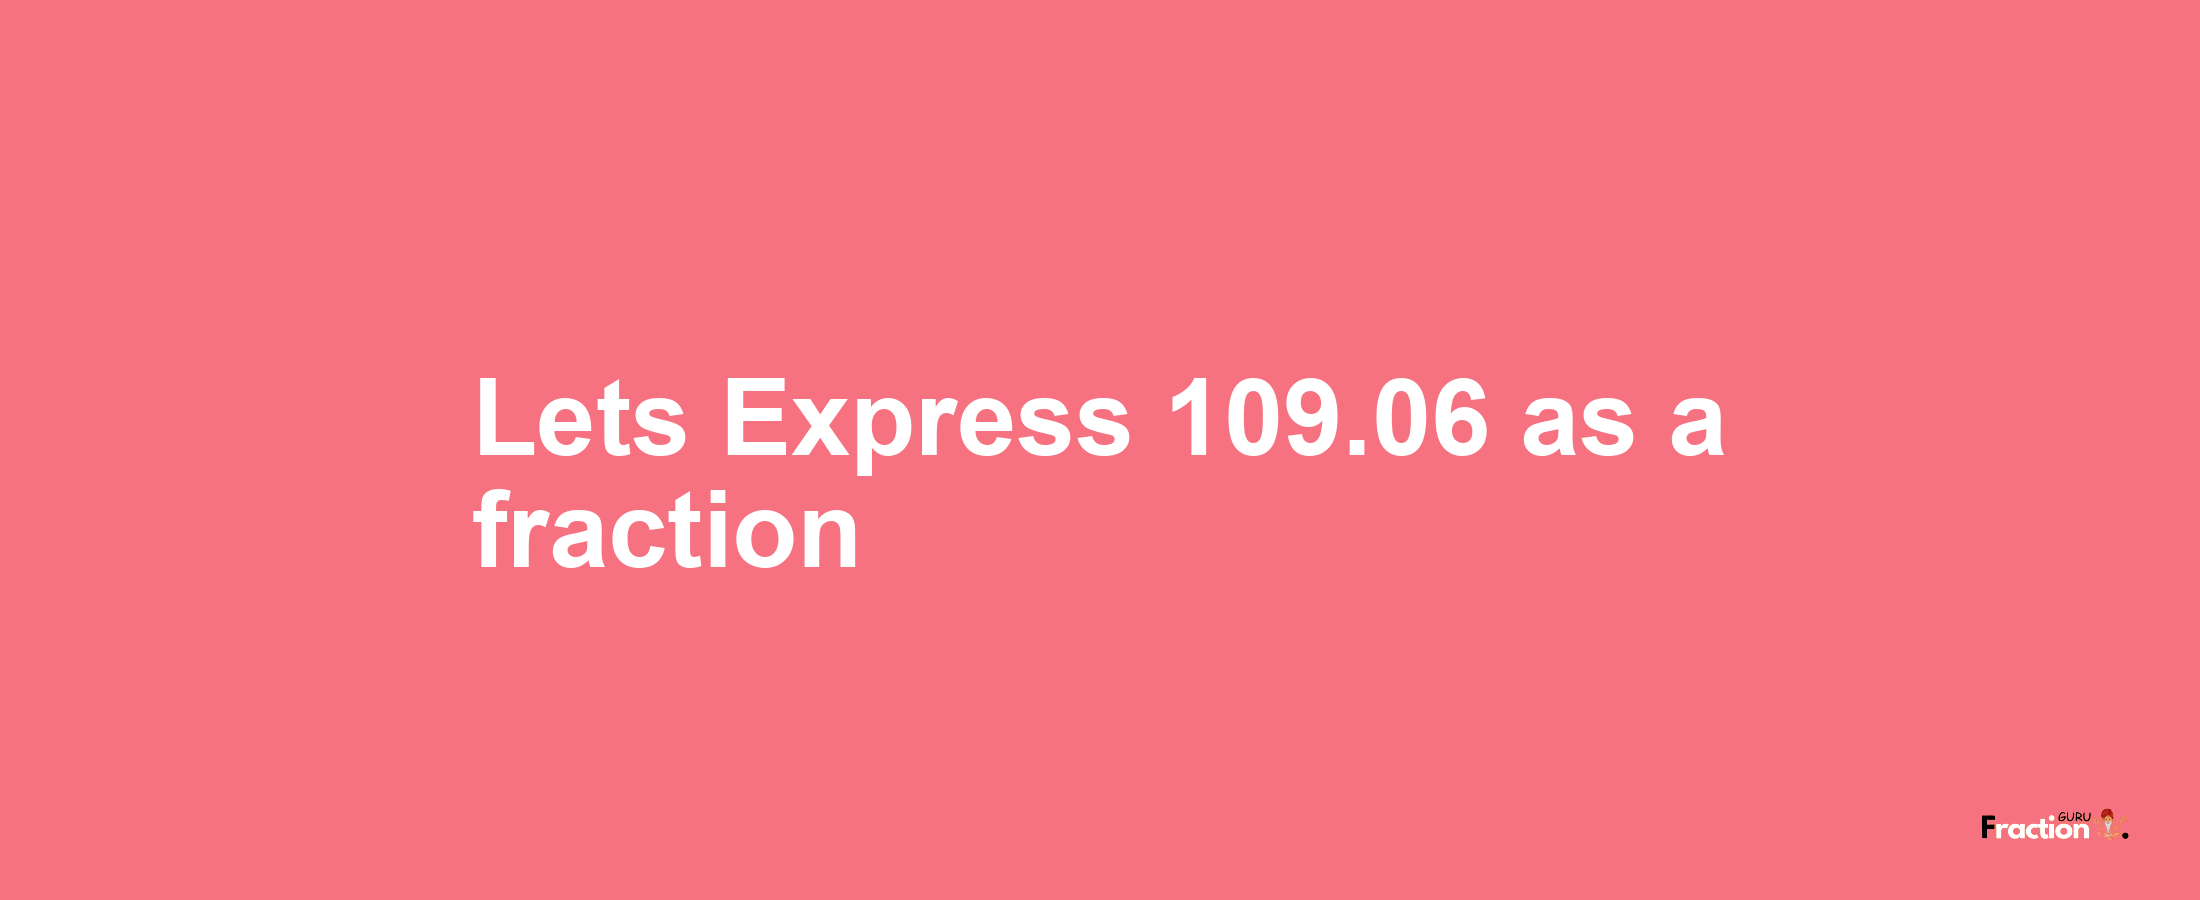 Lets Express 109.06 as afraction